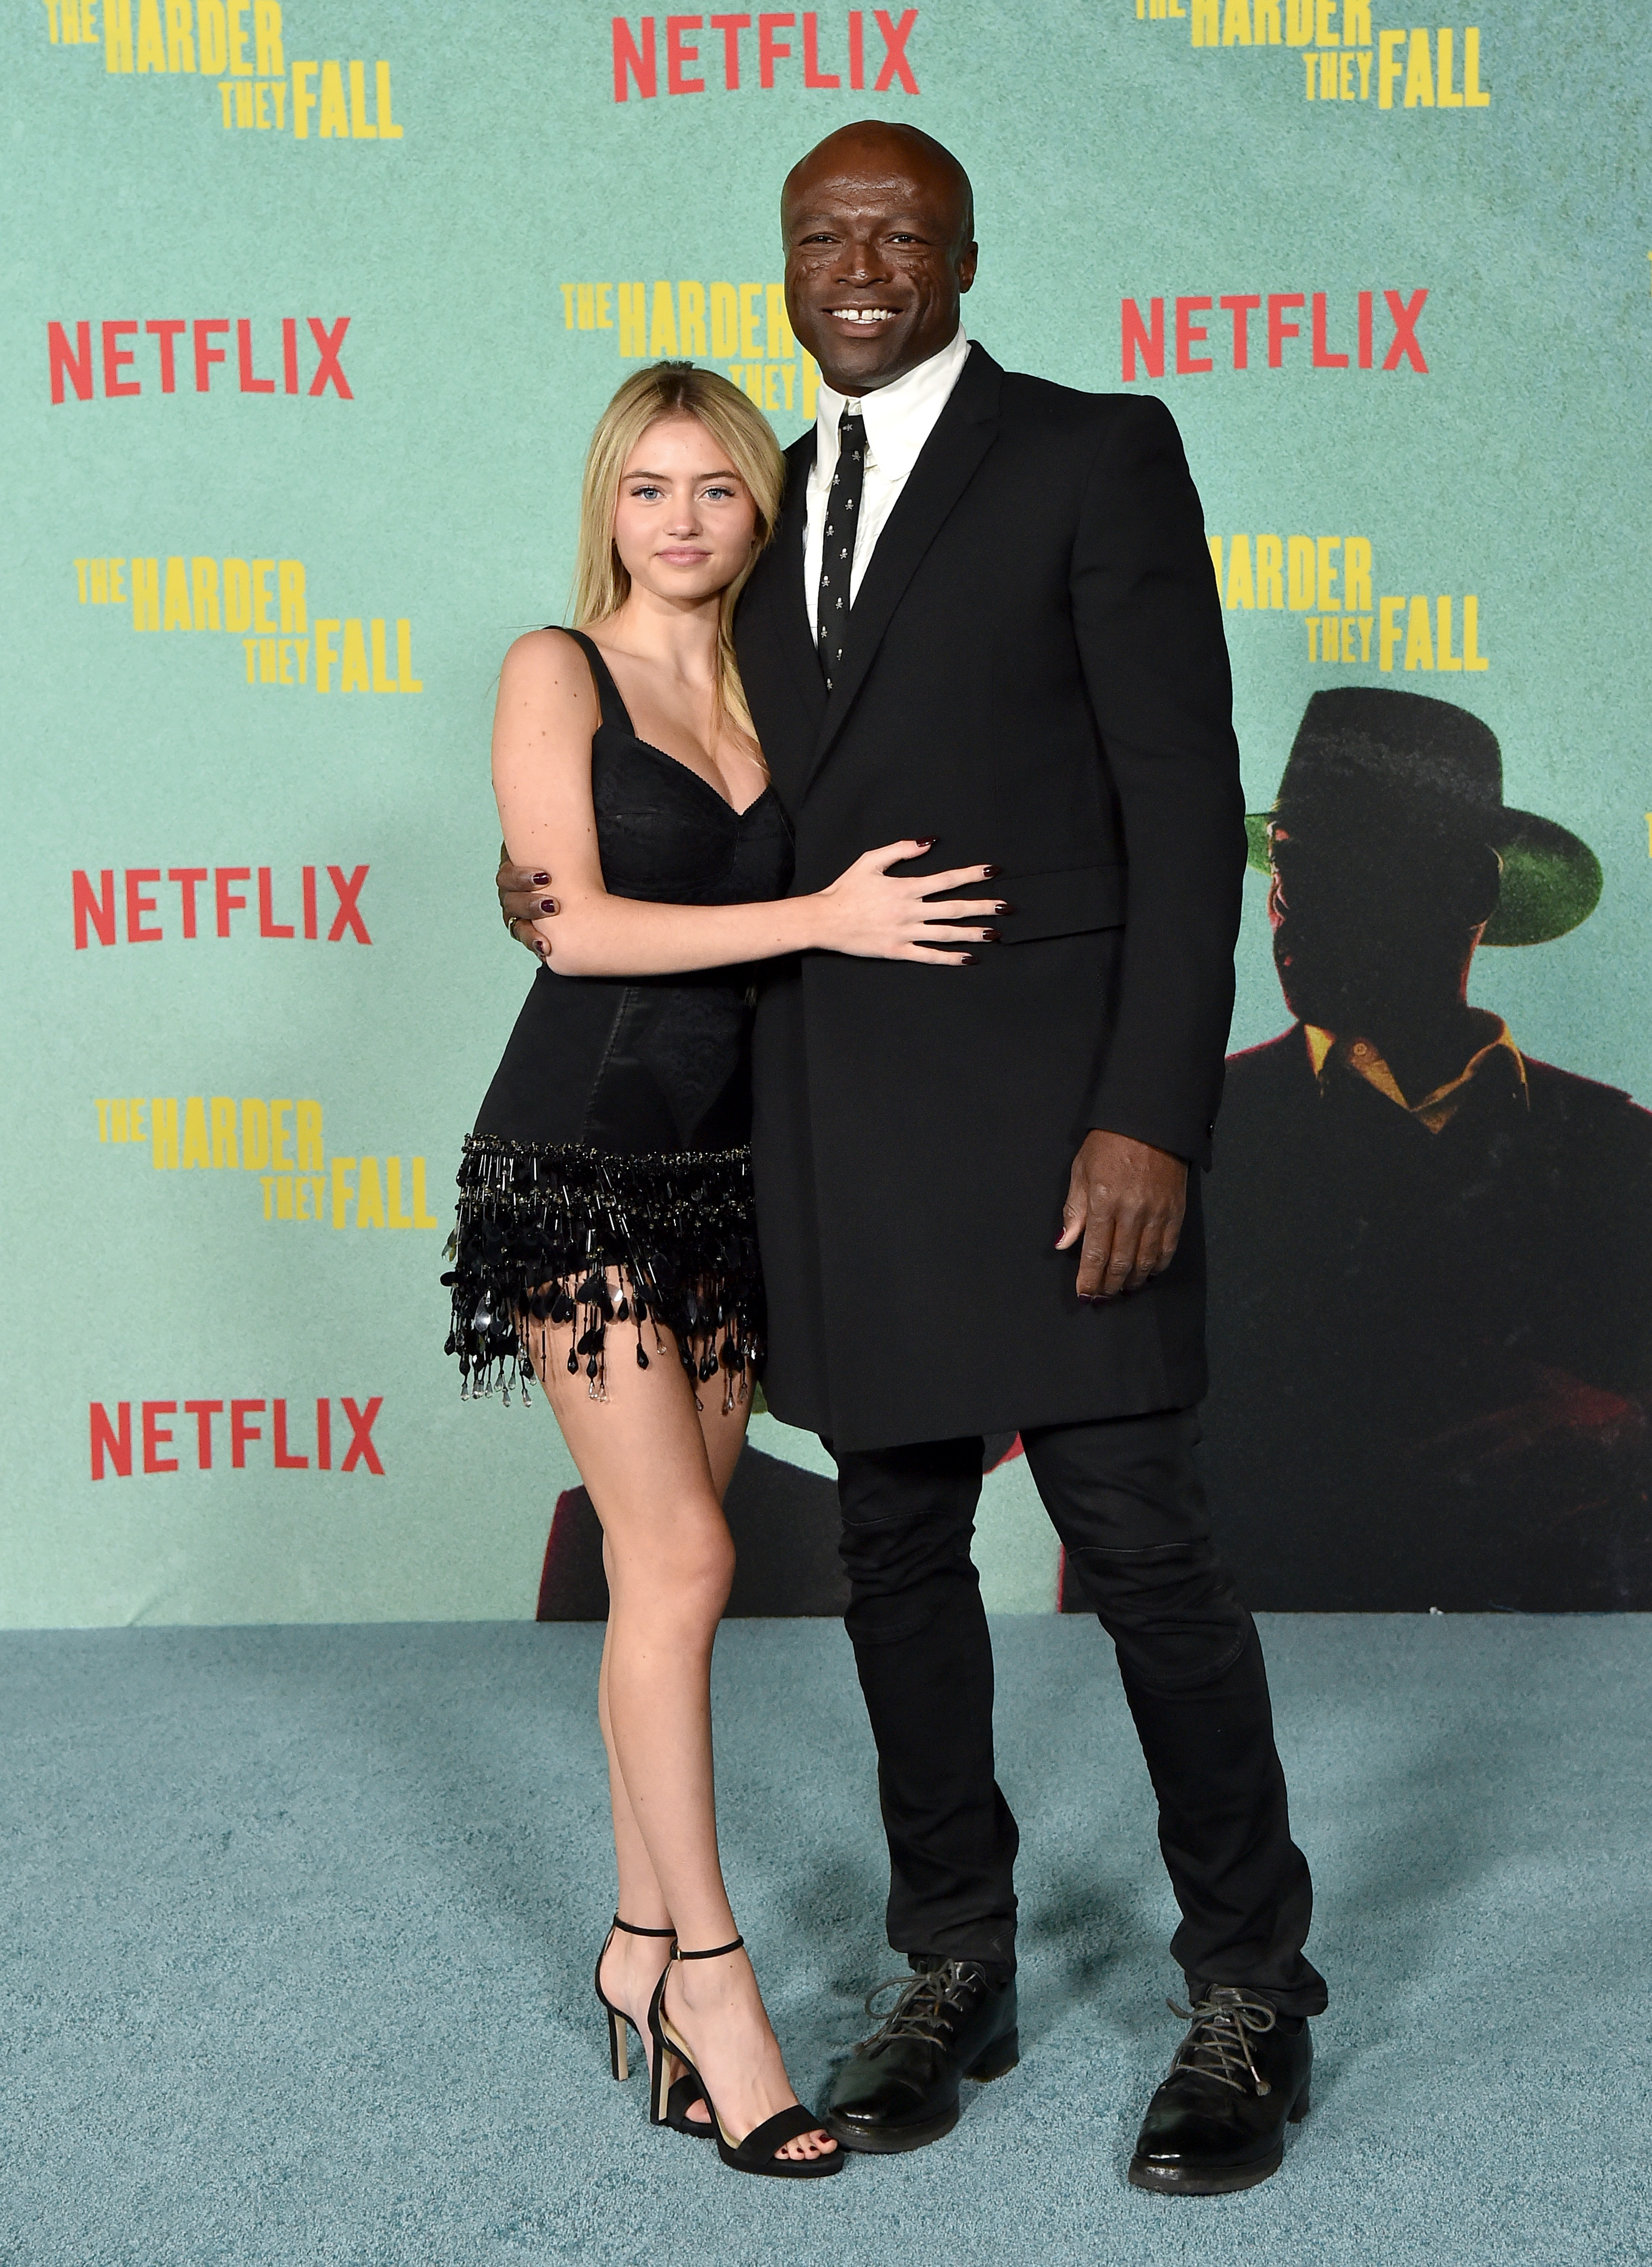 Leni Olumi Klum and Seal at the premiere of "The Harder They Fall" in Los Angeles in 2021 | Source: Getty Images